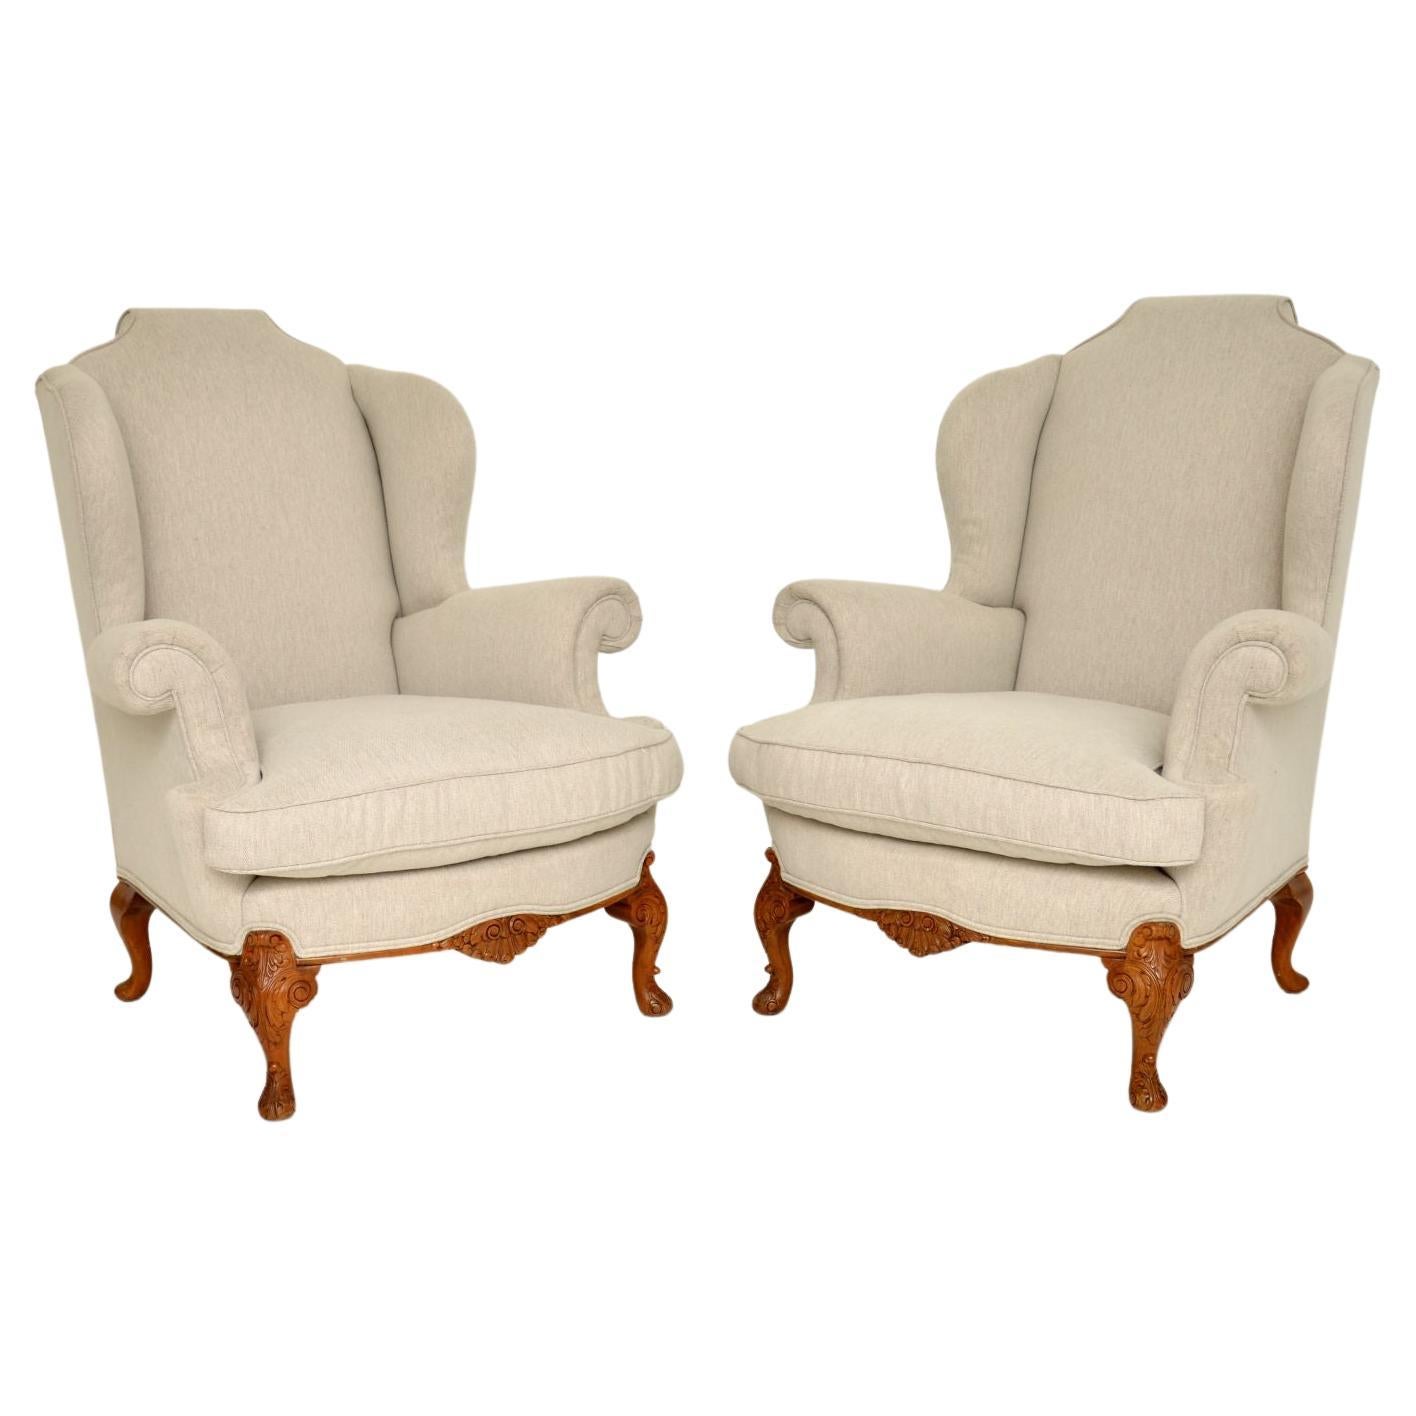 Pair of Antique Carved Walnut Wing Back Armchairs